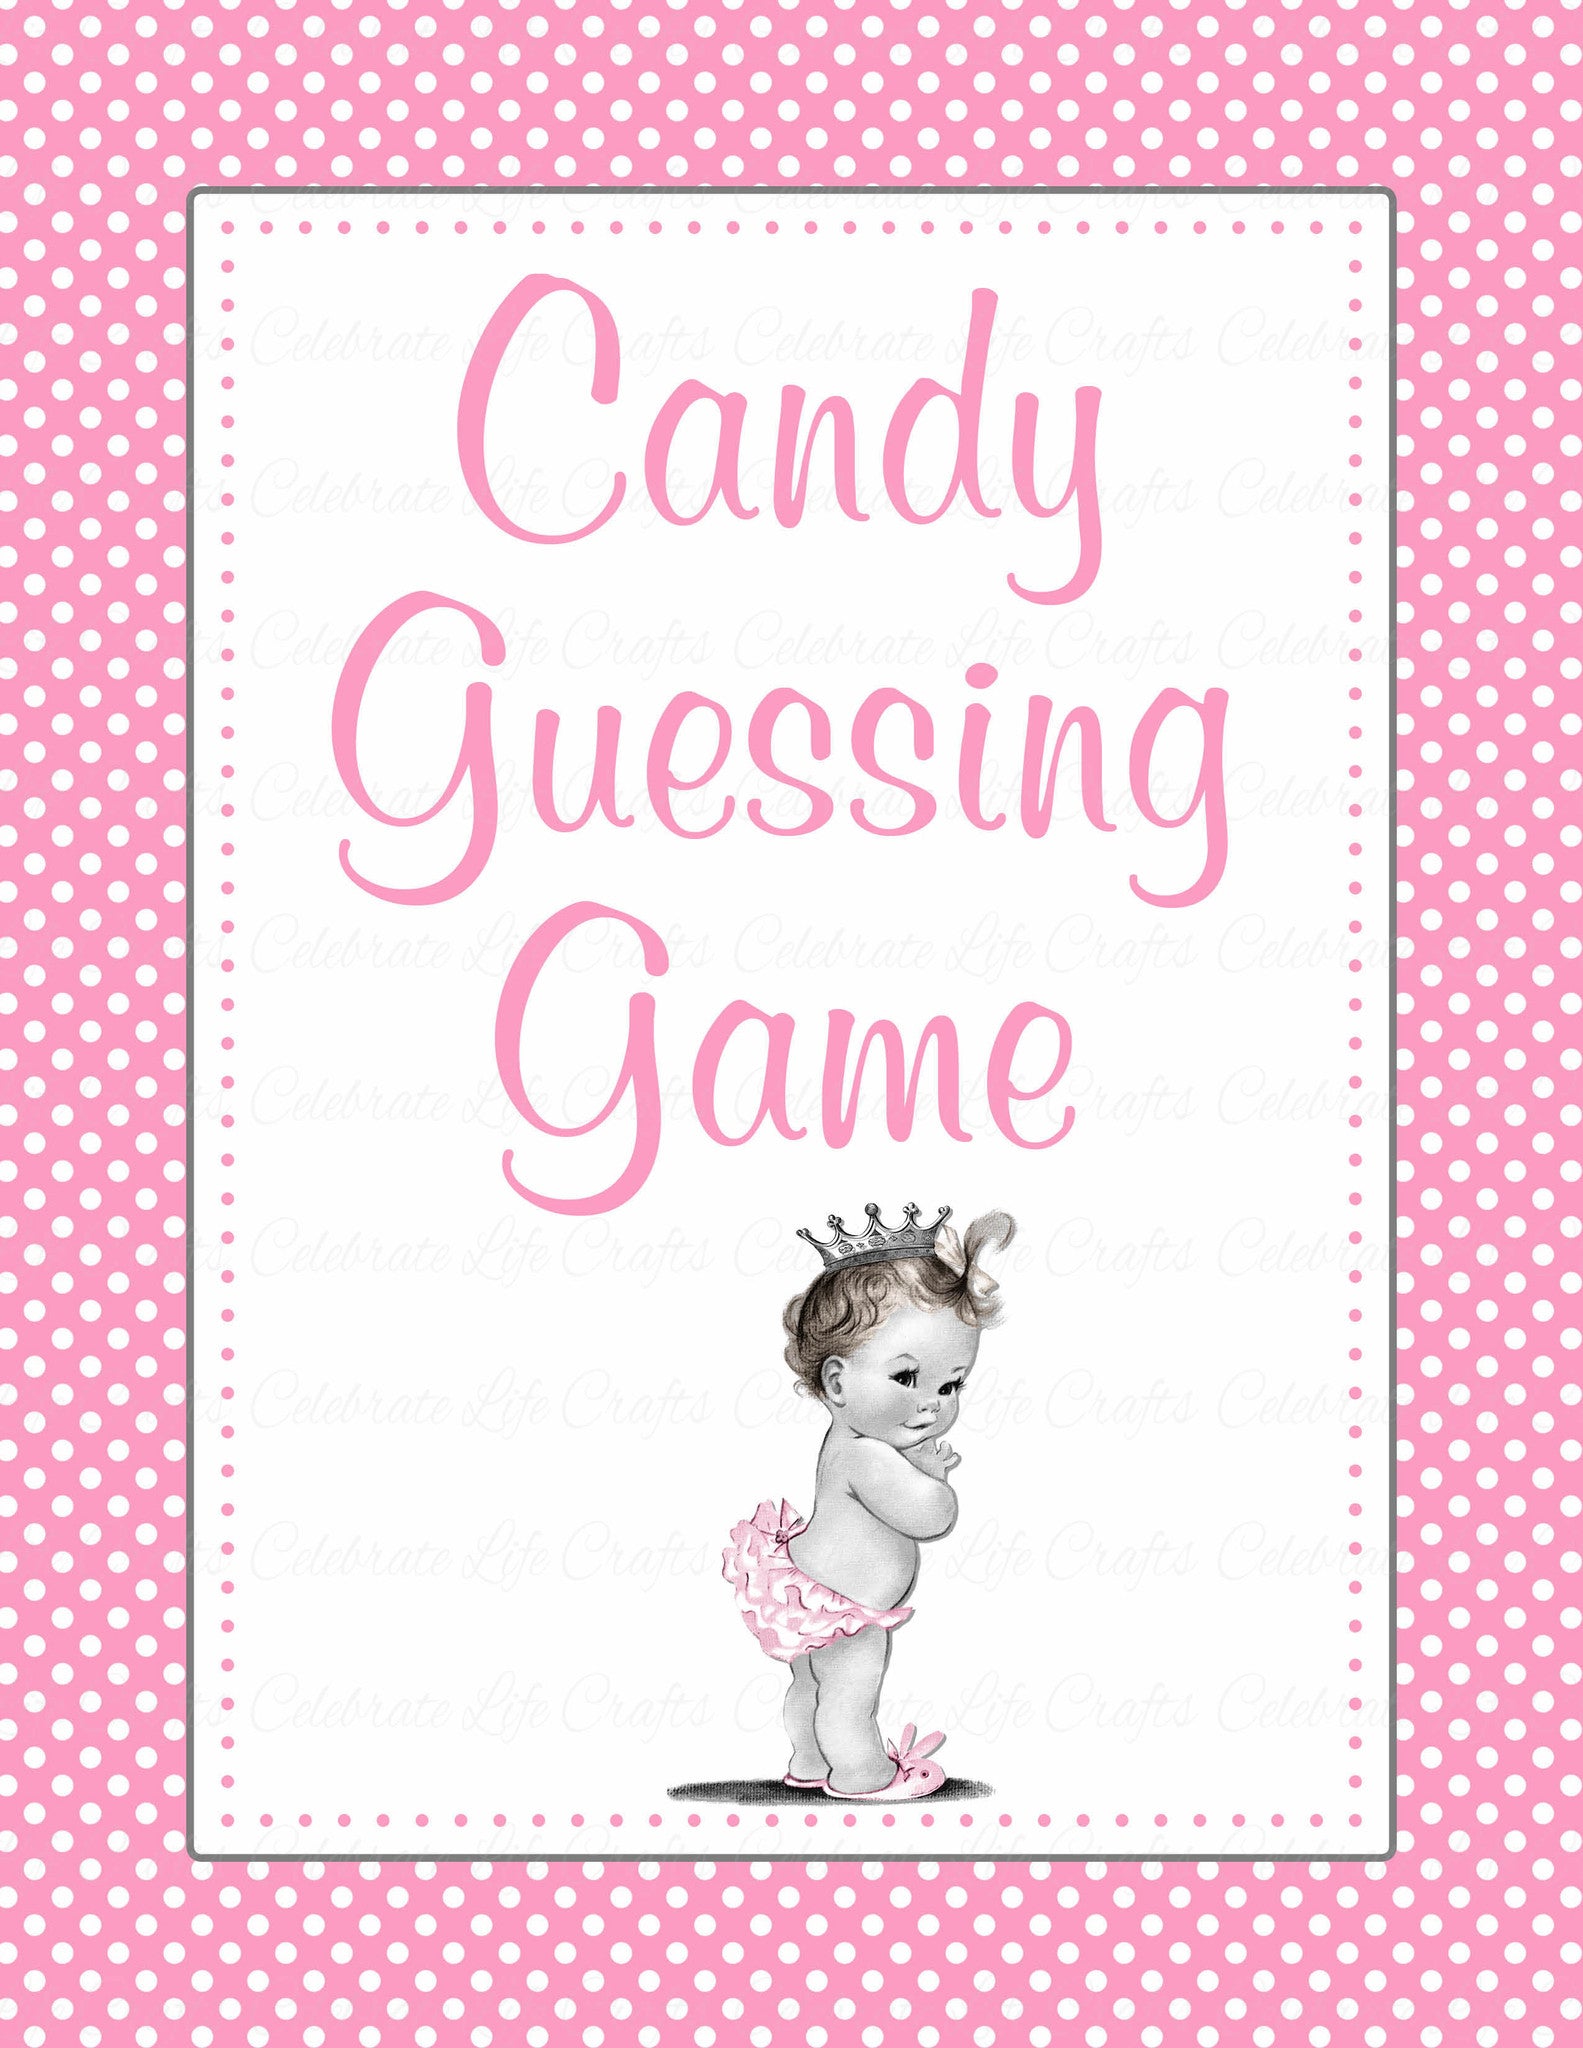 candy-guessing-game-guess-how-many-candies-are-in-the-jar-etsy